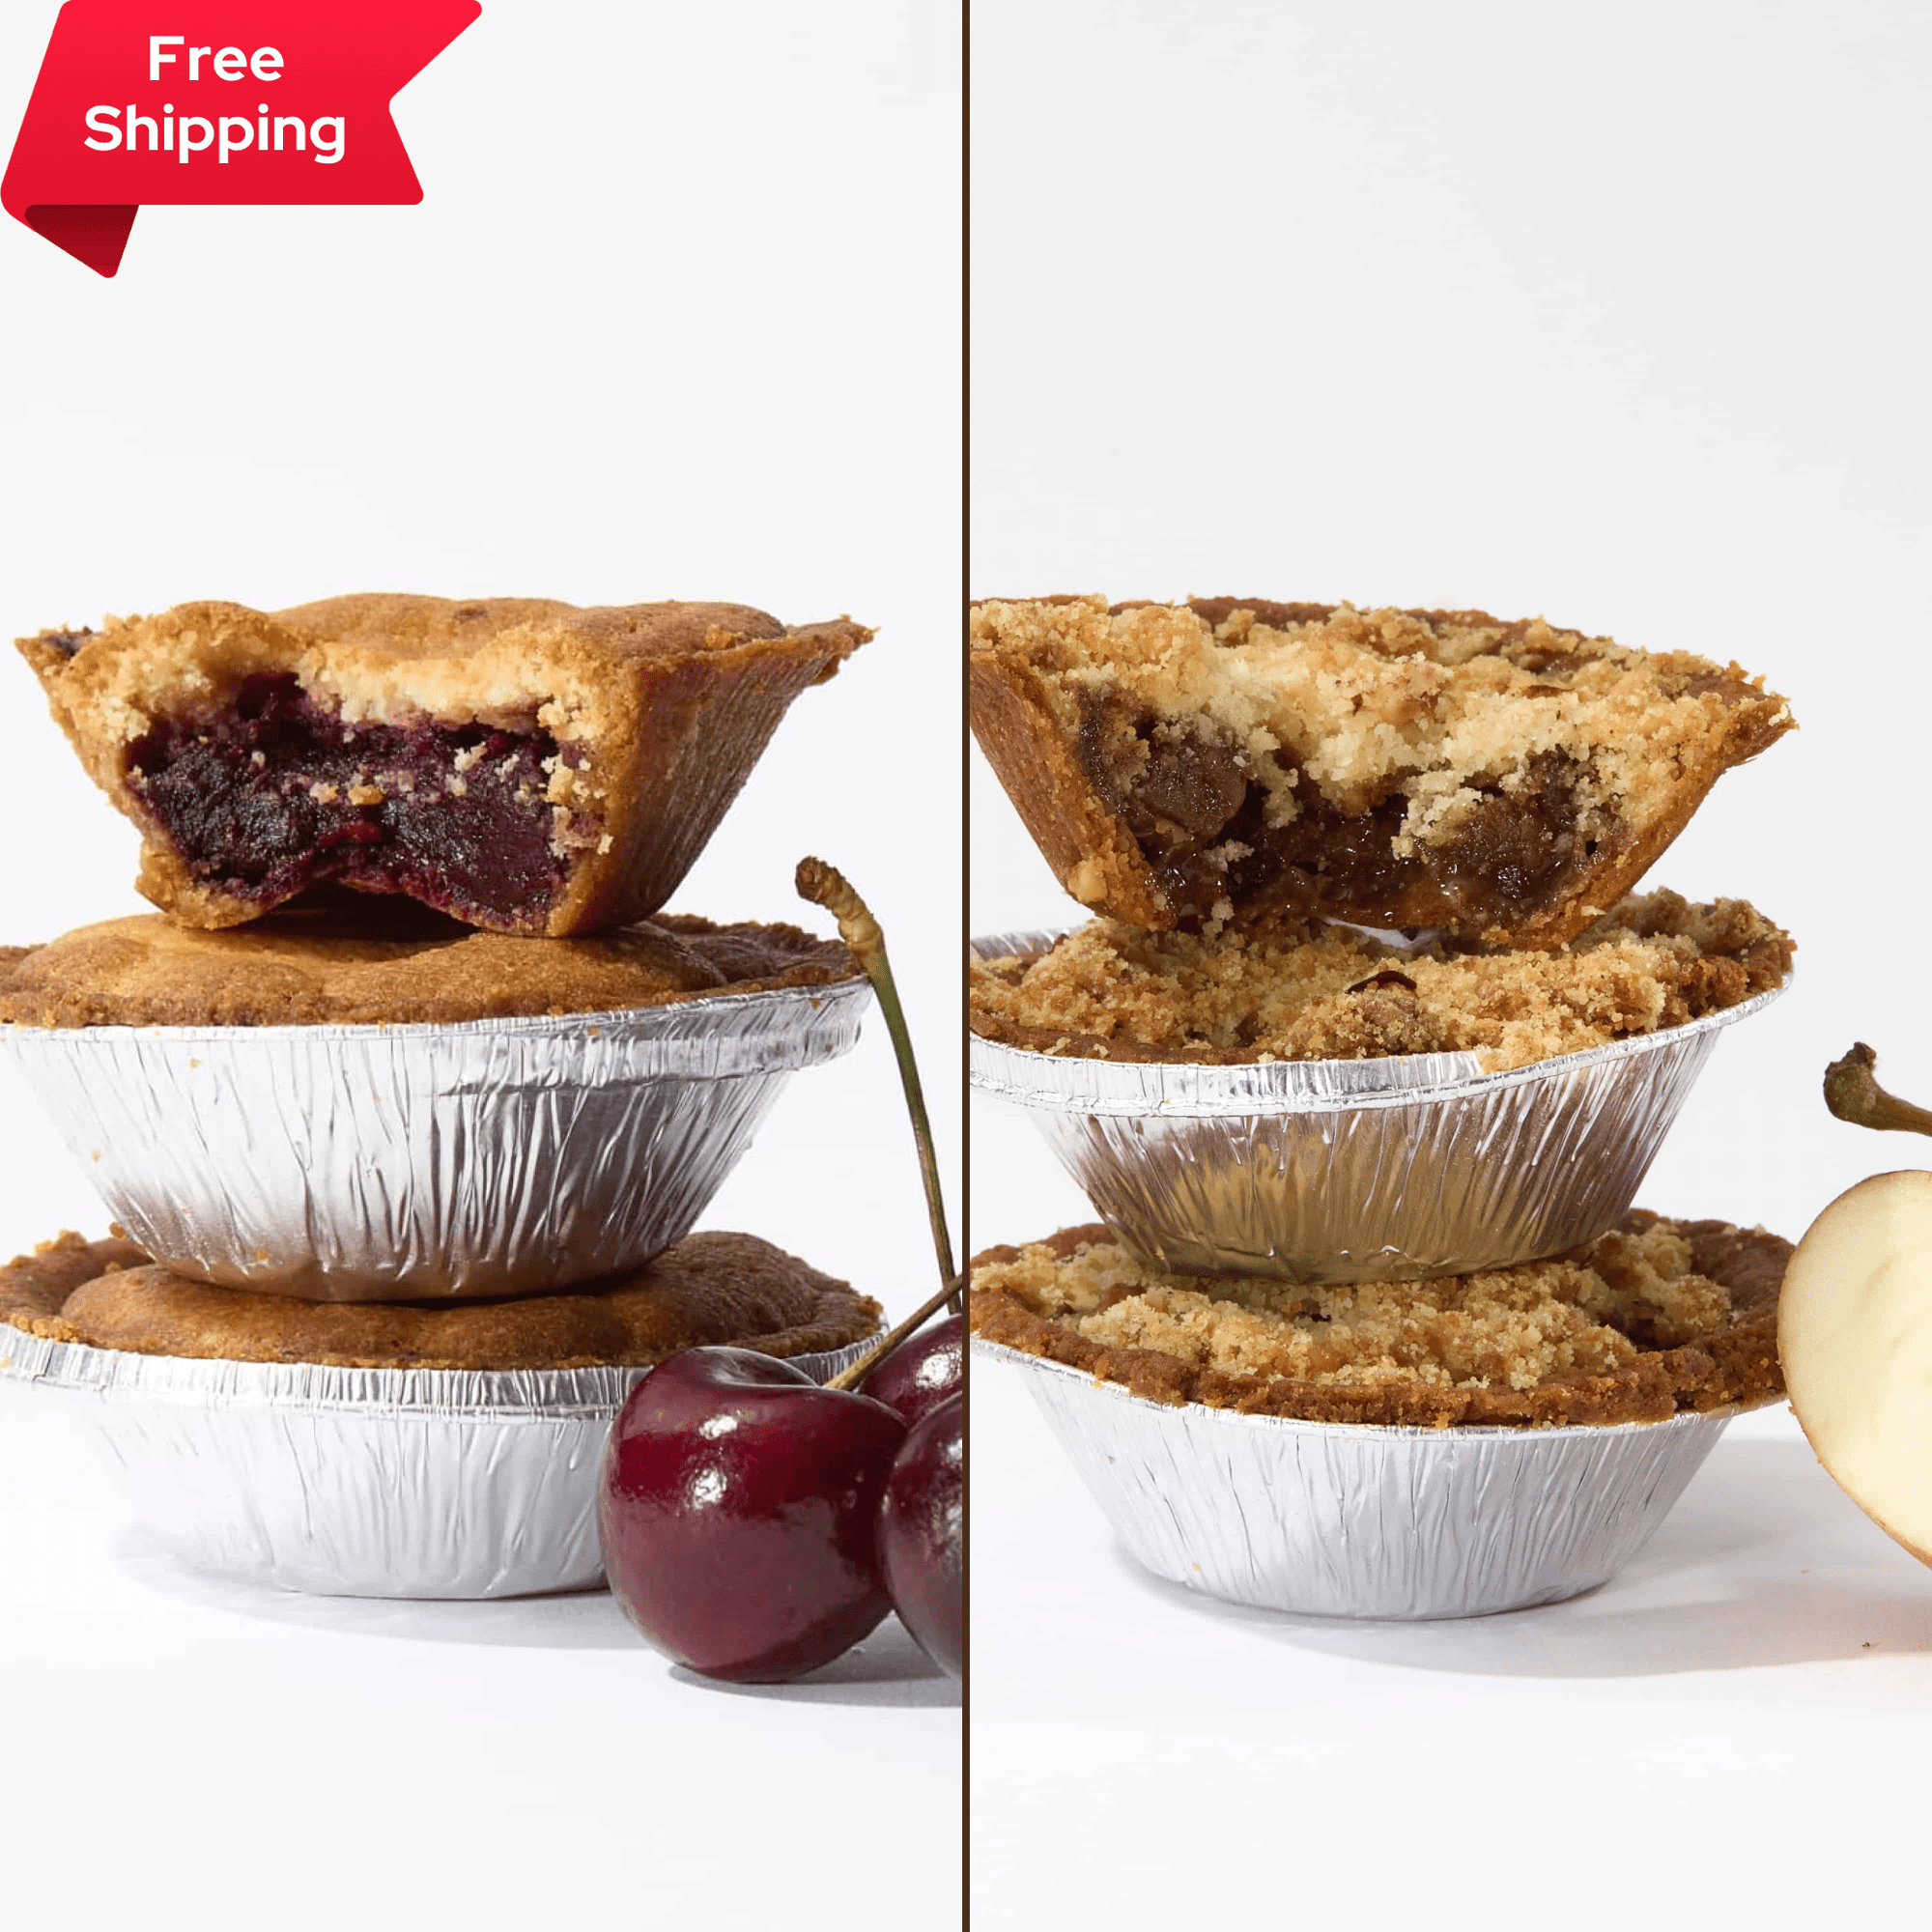 Two types of No Guilt Bakes Low Carb Tart Bundles with one cut open on each side, against a white background, with a 'free shipping' label in the top left corner.